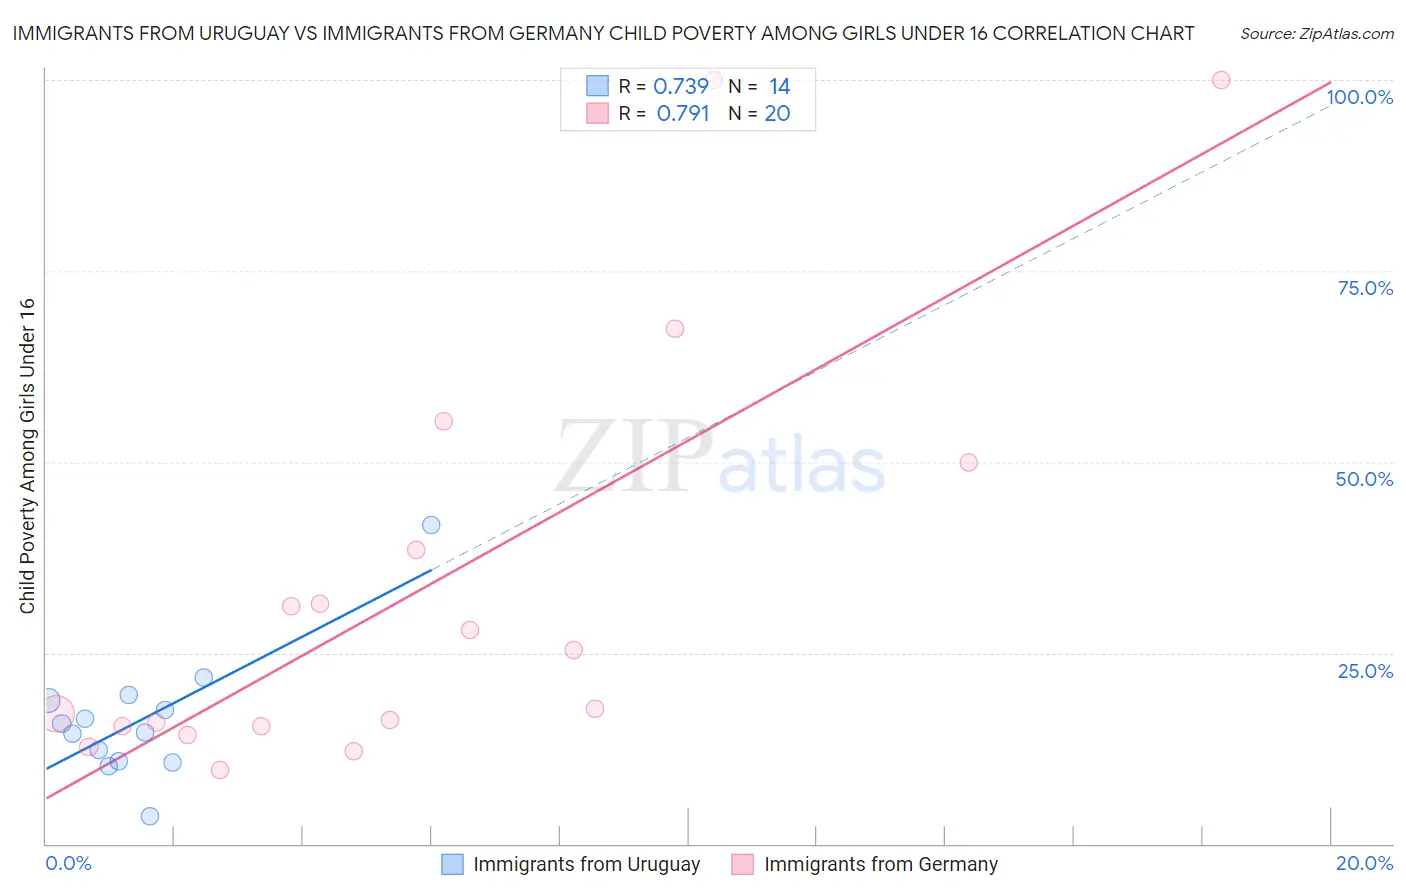 Immigrants from Uruguay vs Immigrants from Germany Child Poverty Among Girls Under 16